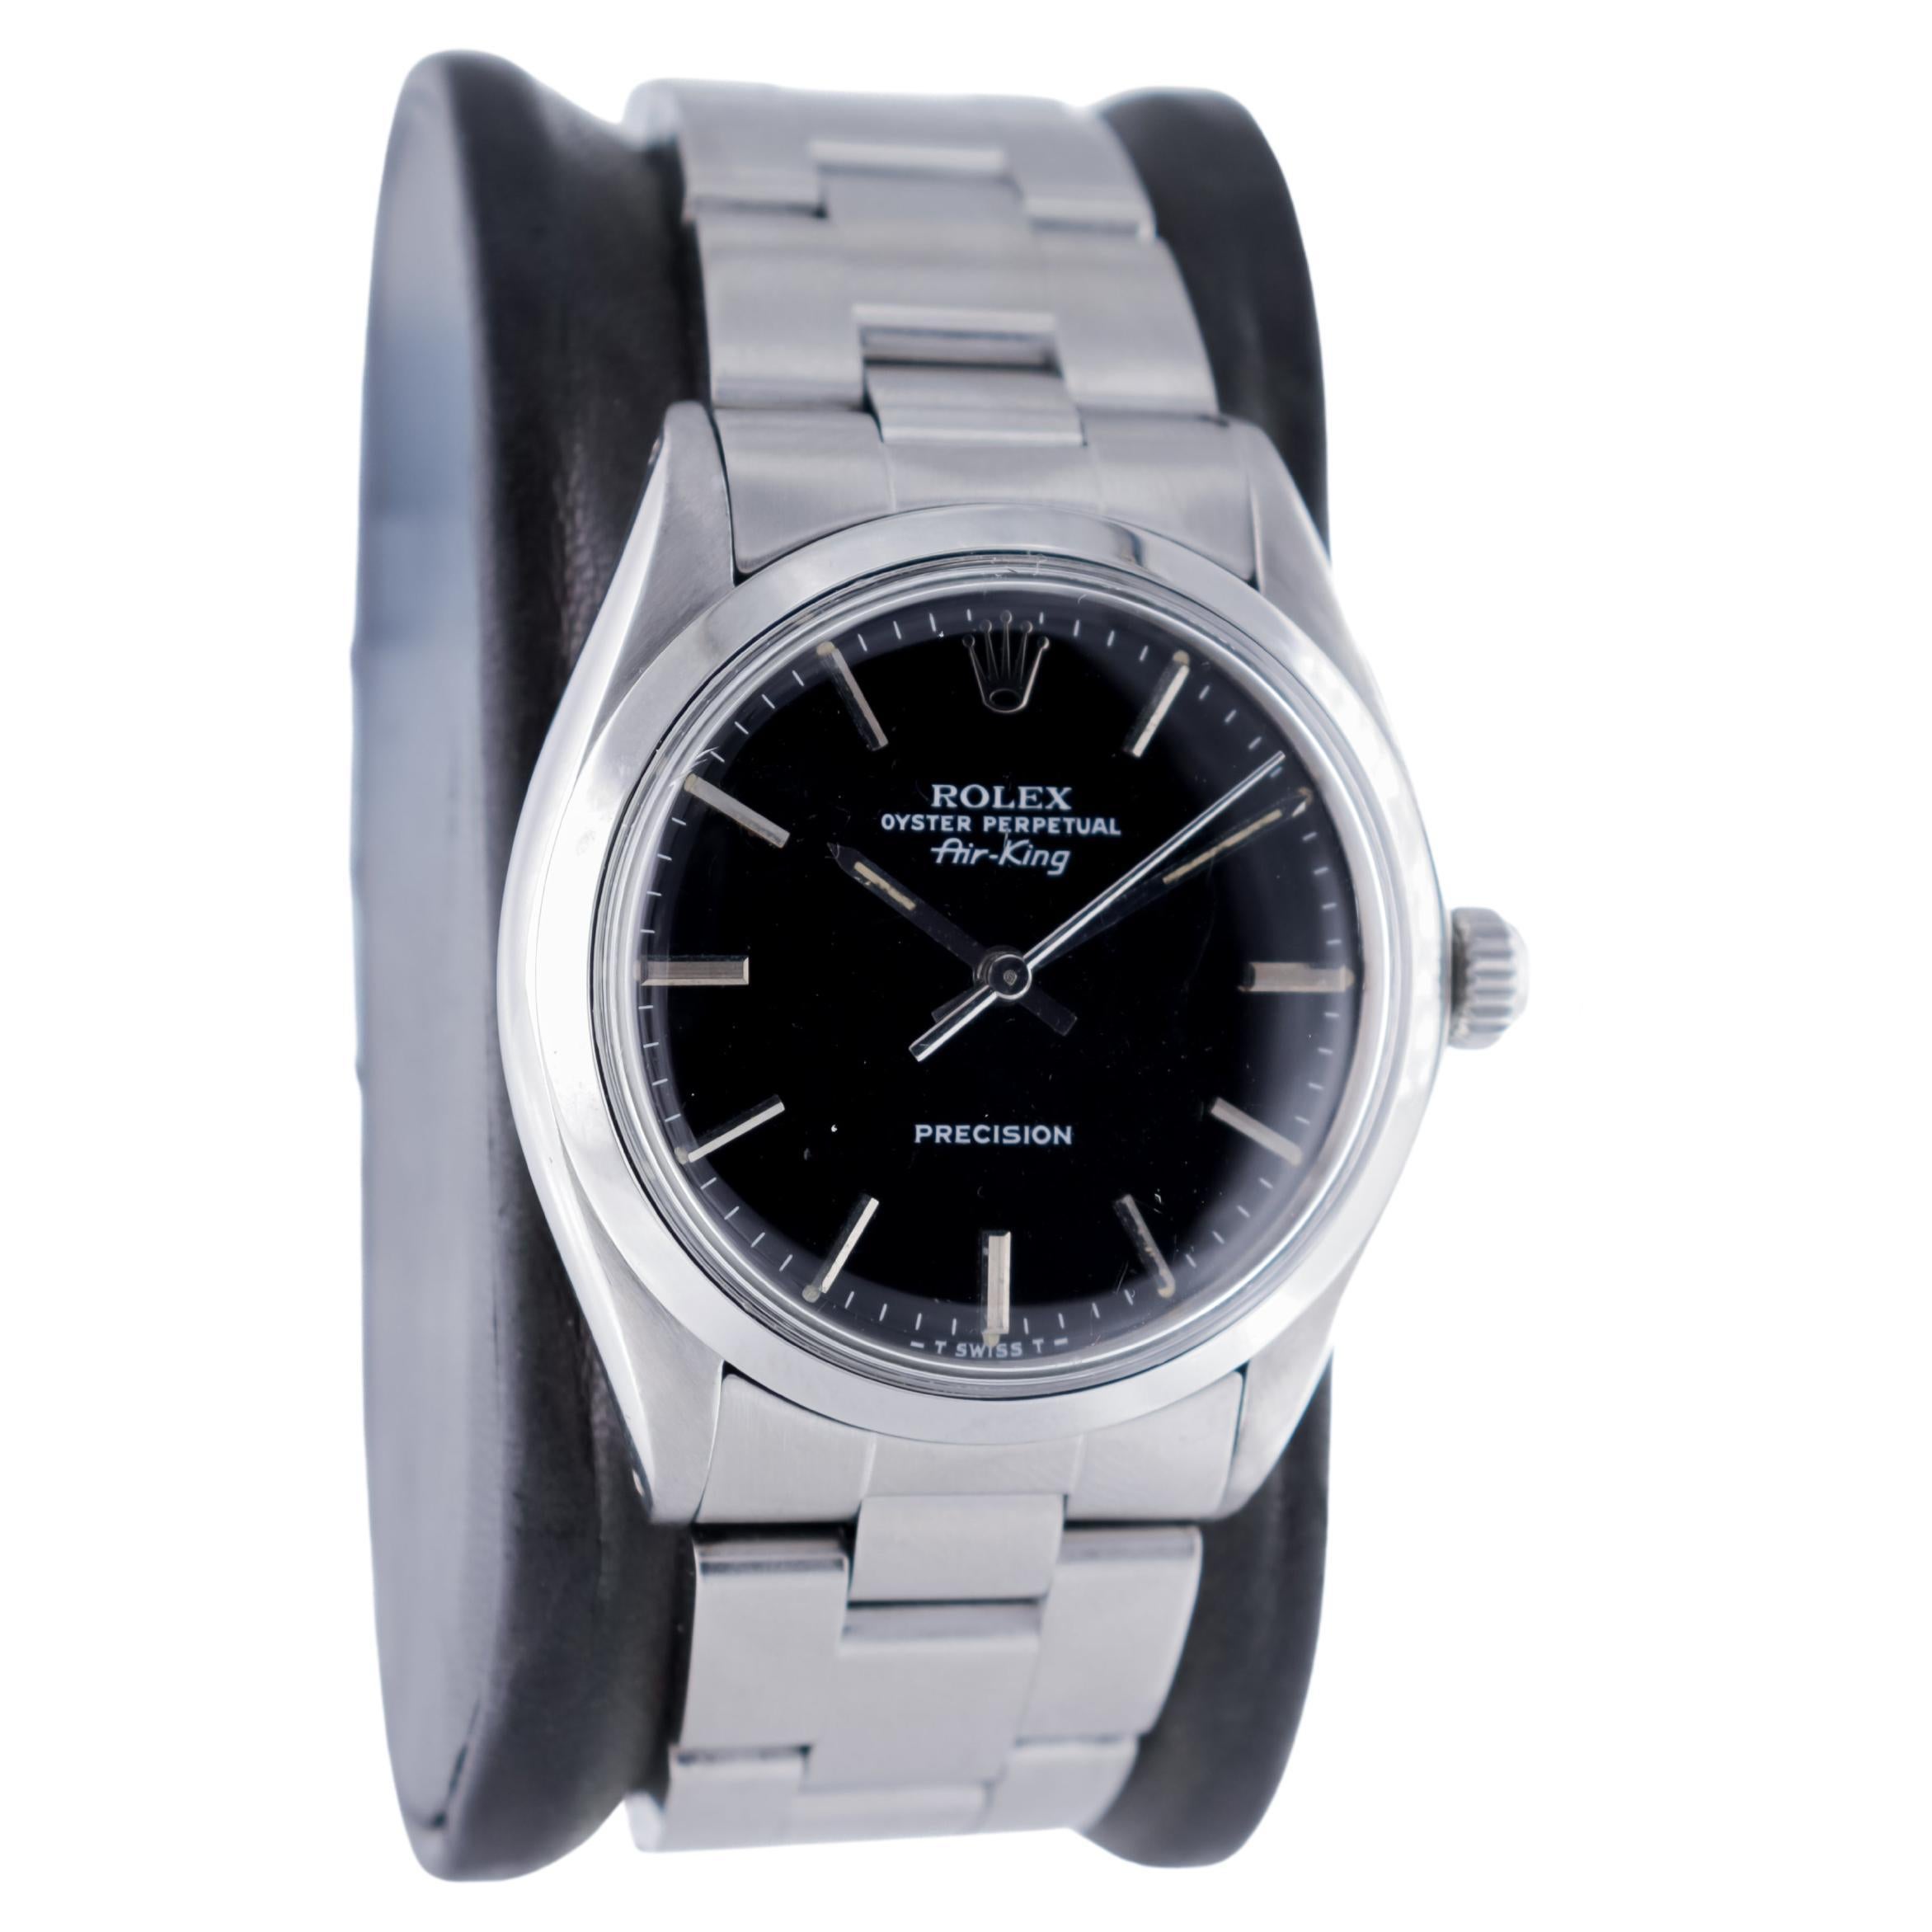 FACTORY / HOUSE: Rolex Watch Company
STYLE / REFERENCE: Oyster Perpetual Air-King / Reference 5500/1002
METAL / MATERIAL: Stainless Steel
CIRCA / YEAR: 1974
DIMENSIONS / SIZE: 40 Length X 34 Diameter
MOVEMENT / CALIBER:  Perpetual Winding / 26